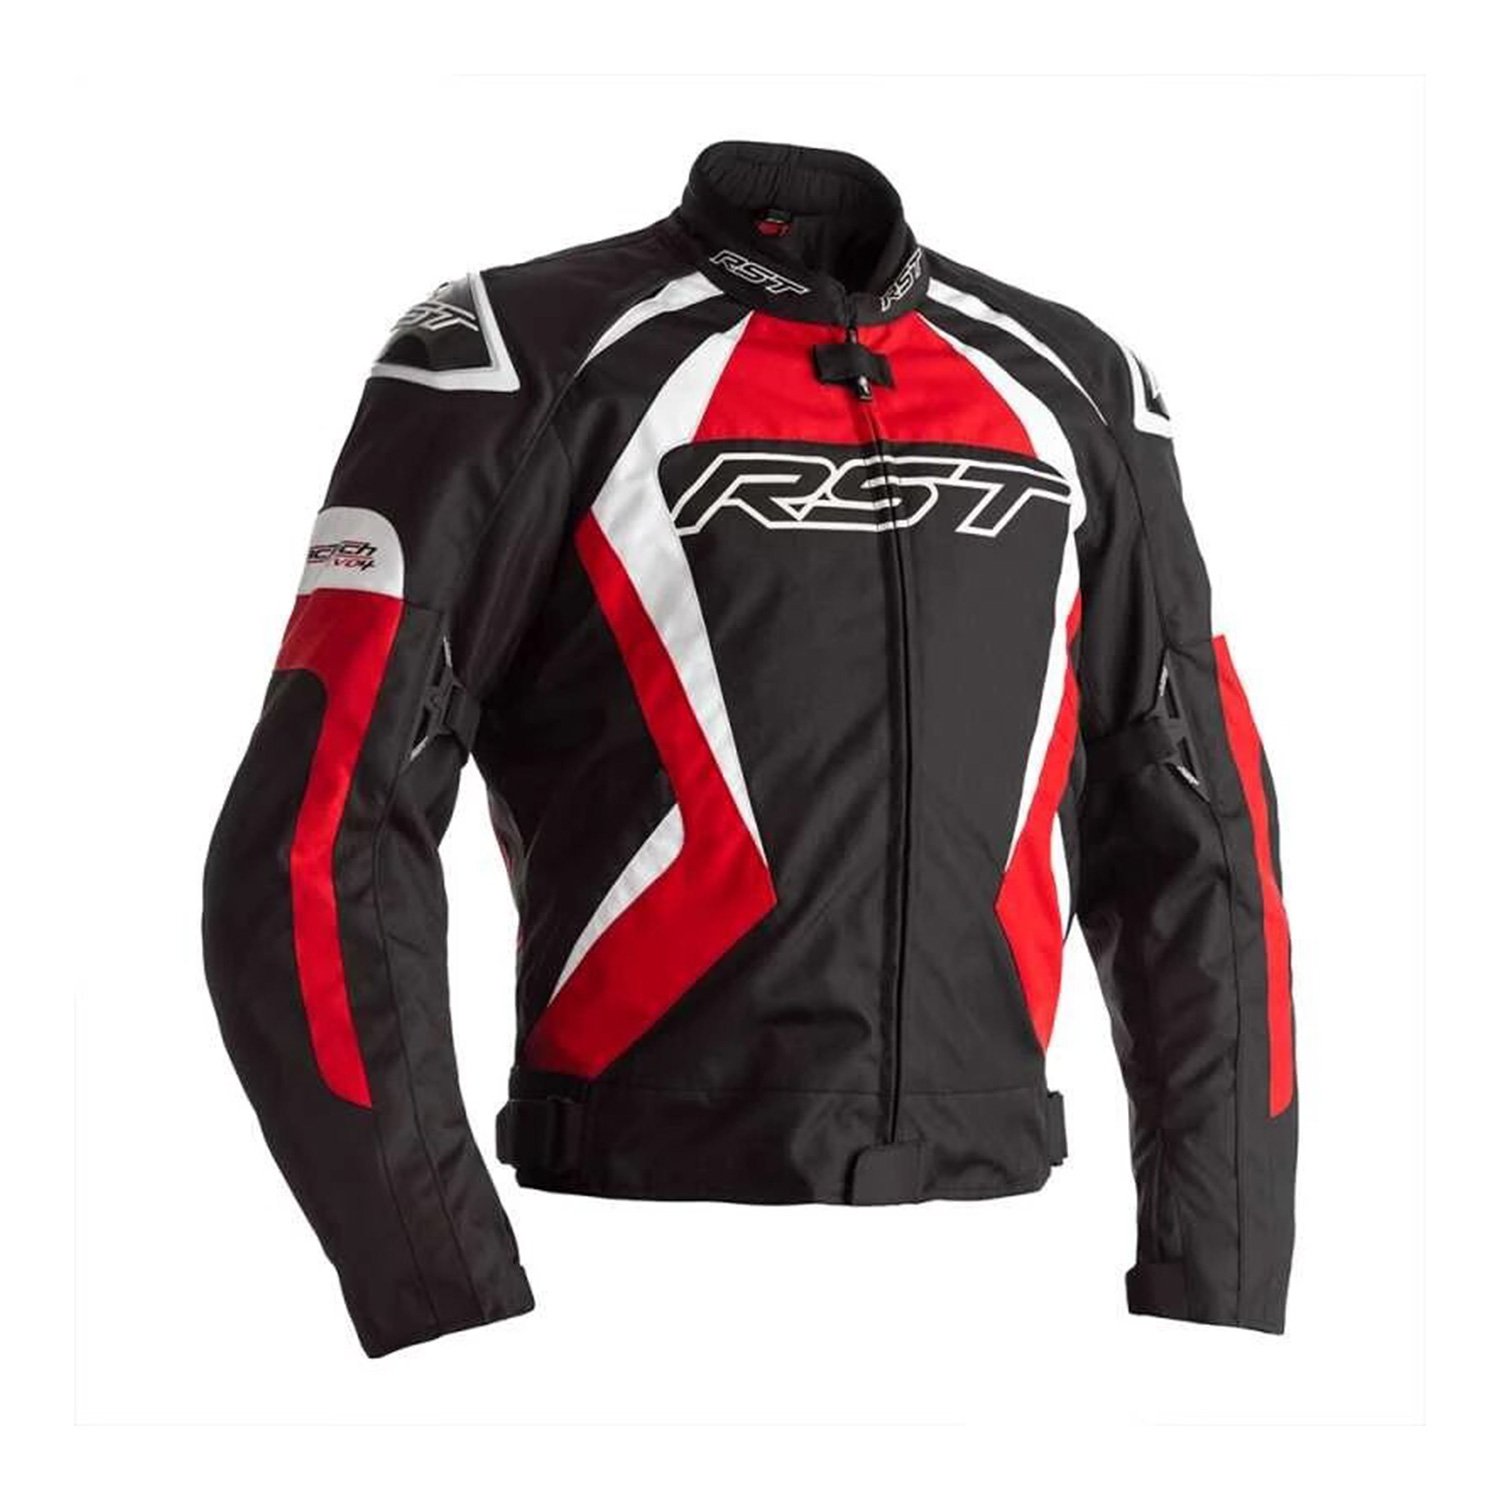 Image of RST Tractech Evo 4 CE Jacket Black Red White Size 48 EN